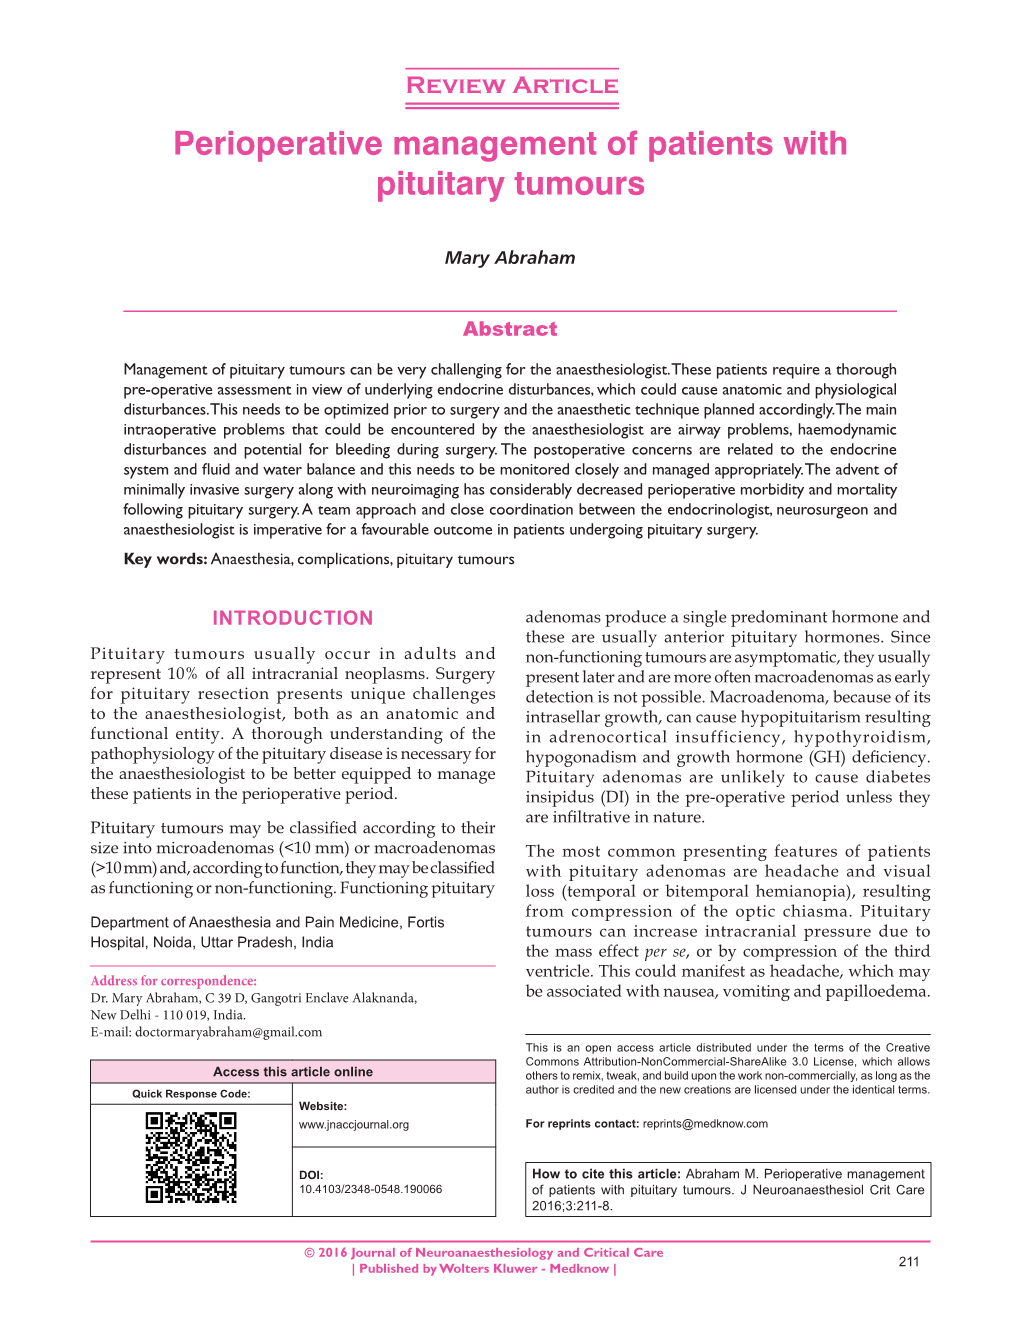 Perioperative Management of Patients with Pituitary Tumours